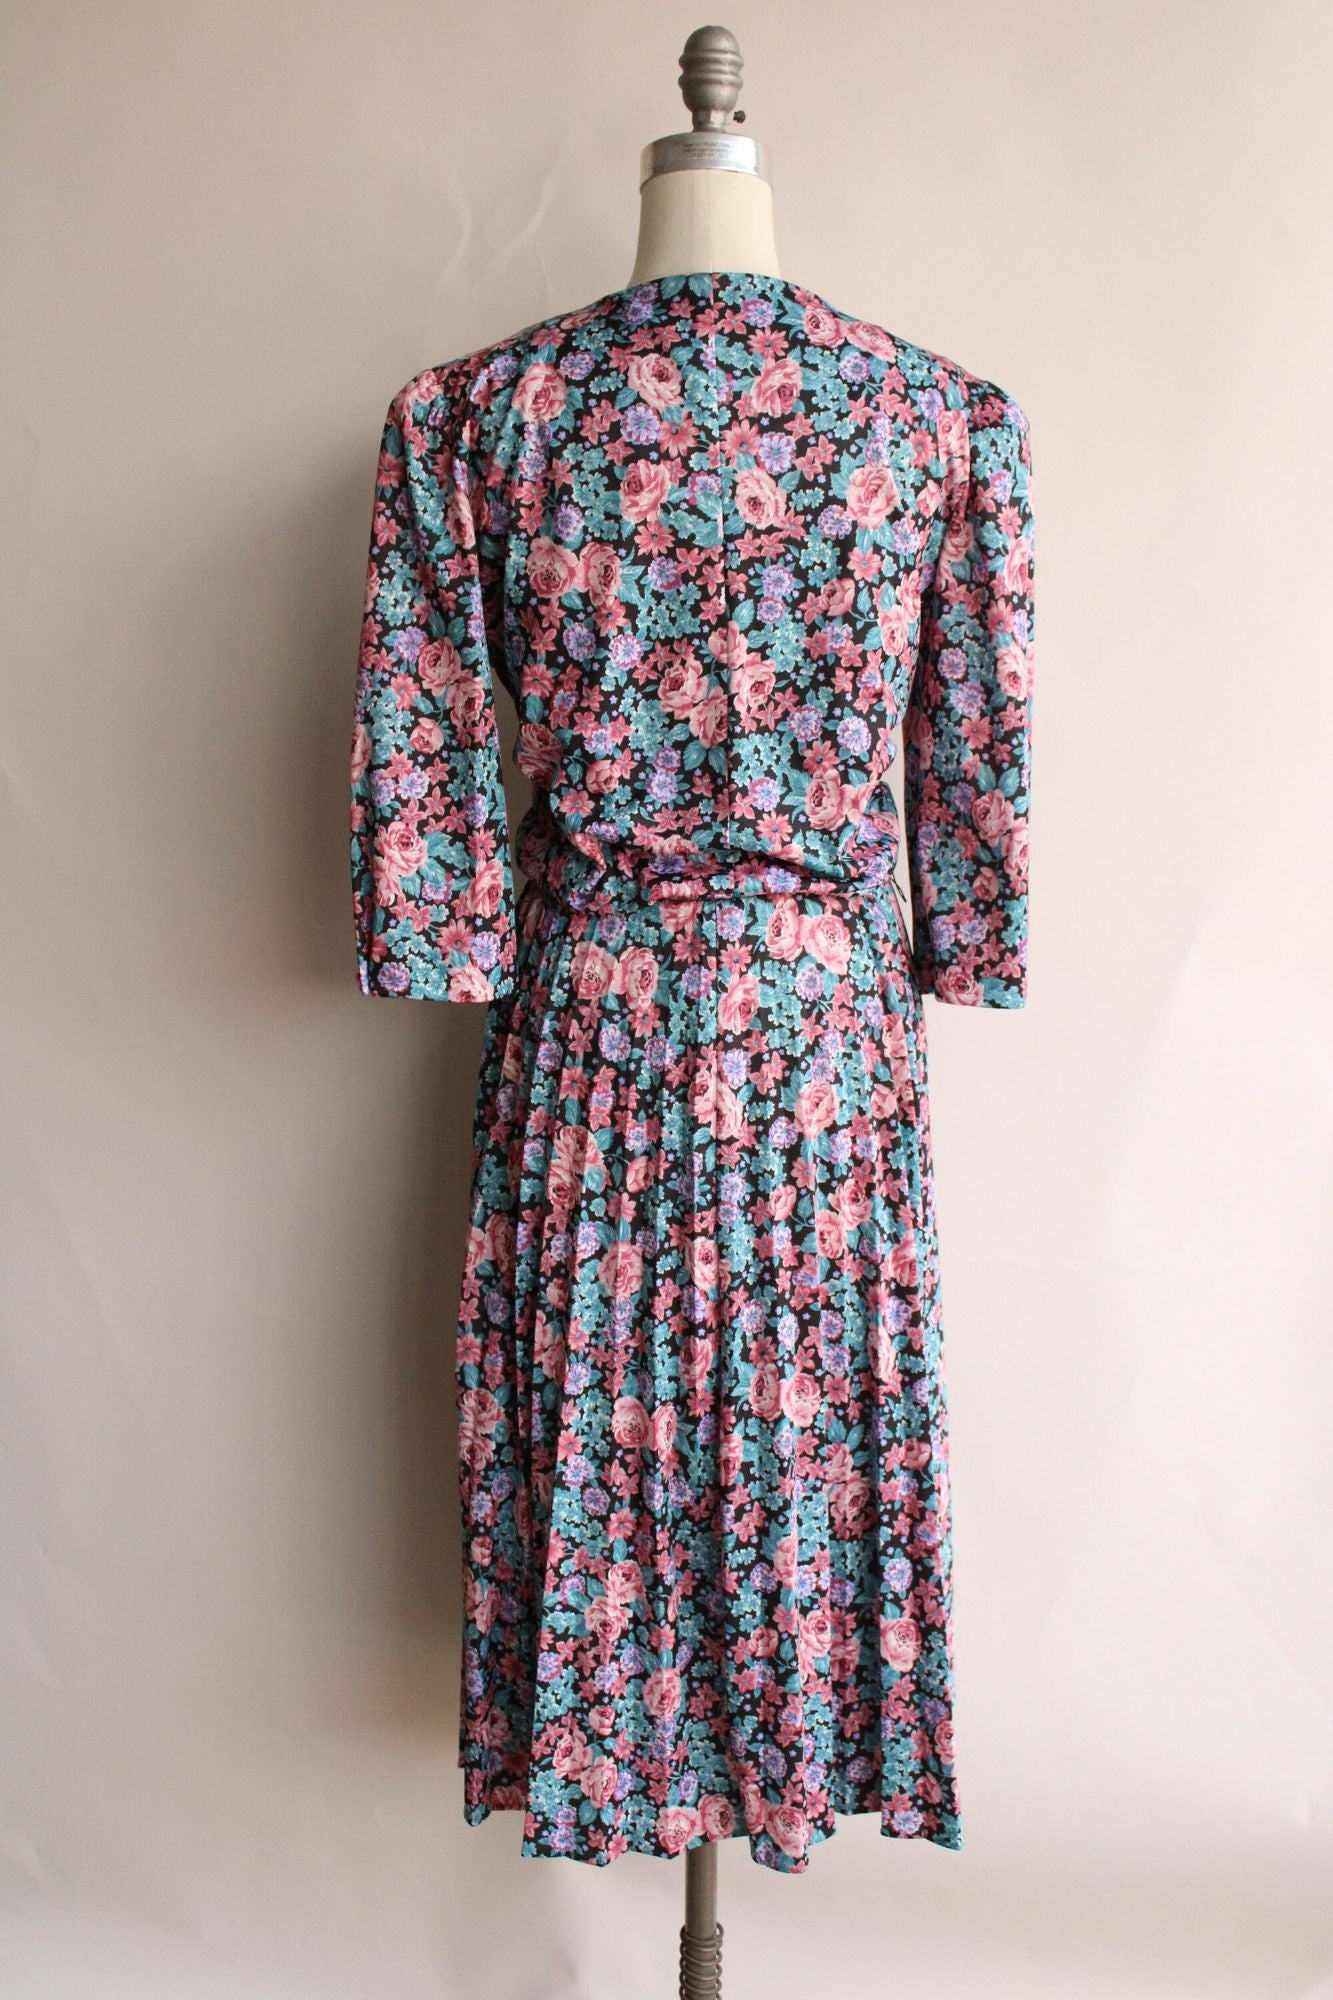 Vintage 1980's Floral Print Dress with Belt and Lace Collar